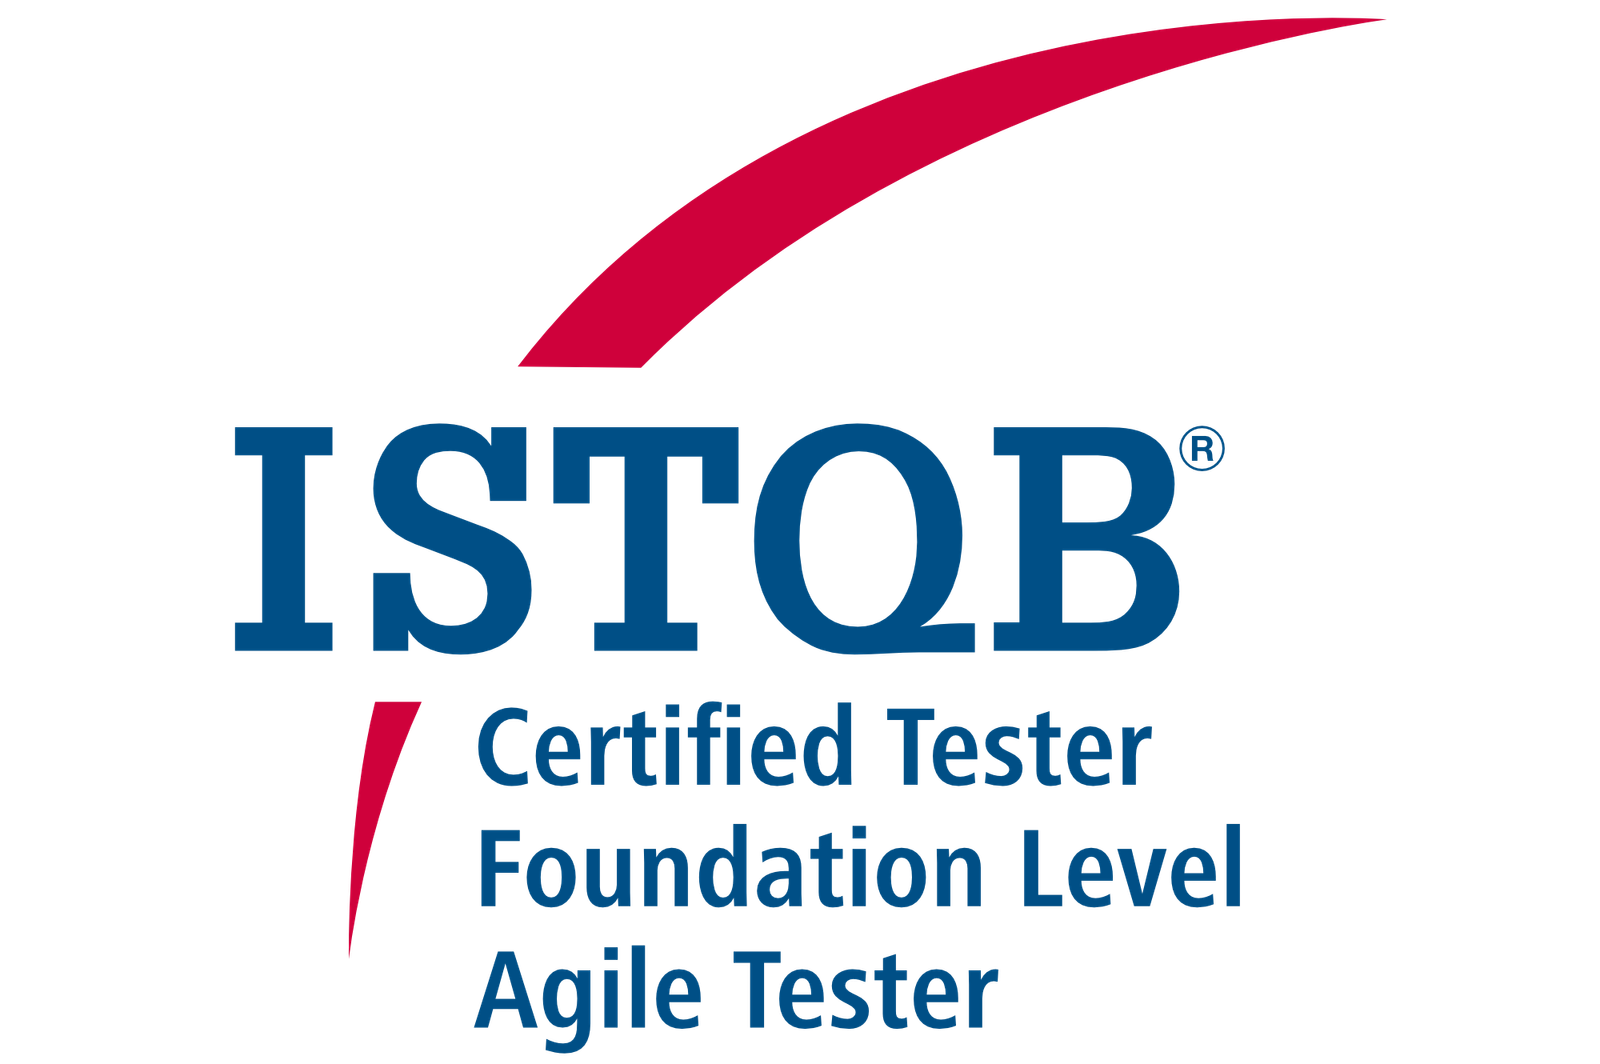 ISTQB Foundation Level Agile Tester - Certified XEye Security Quality Assurance Experts